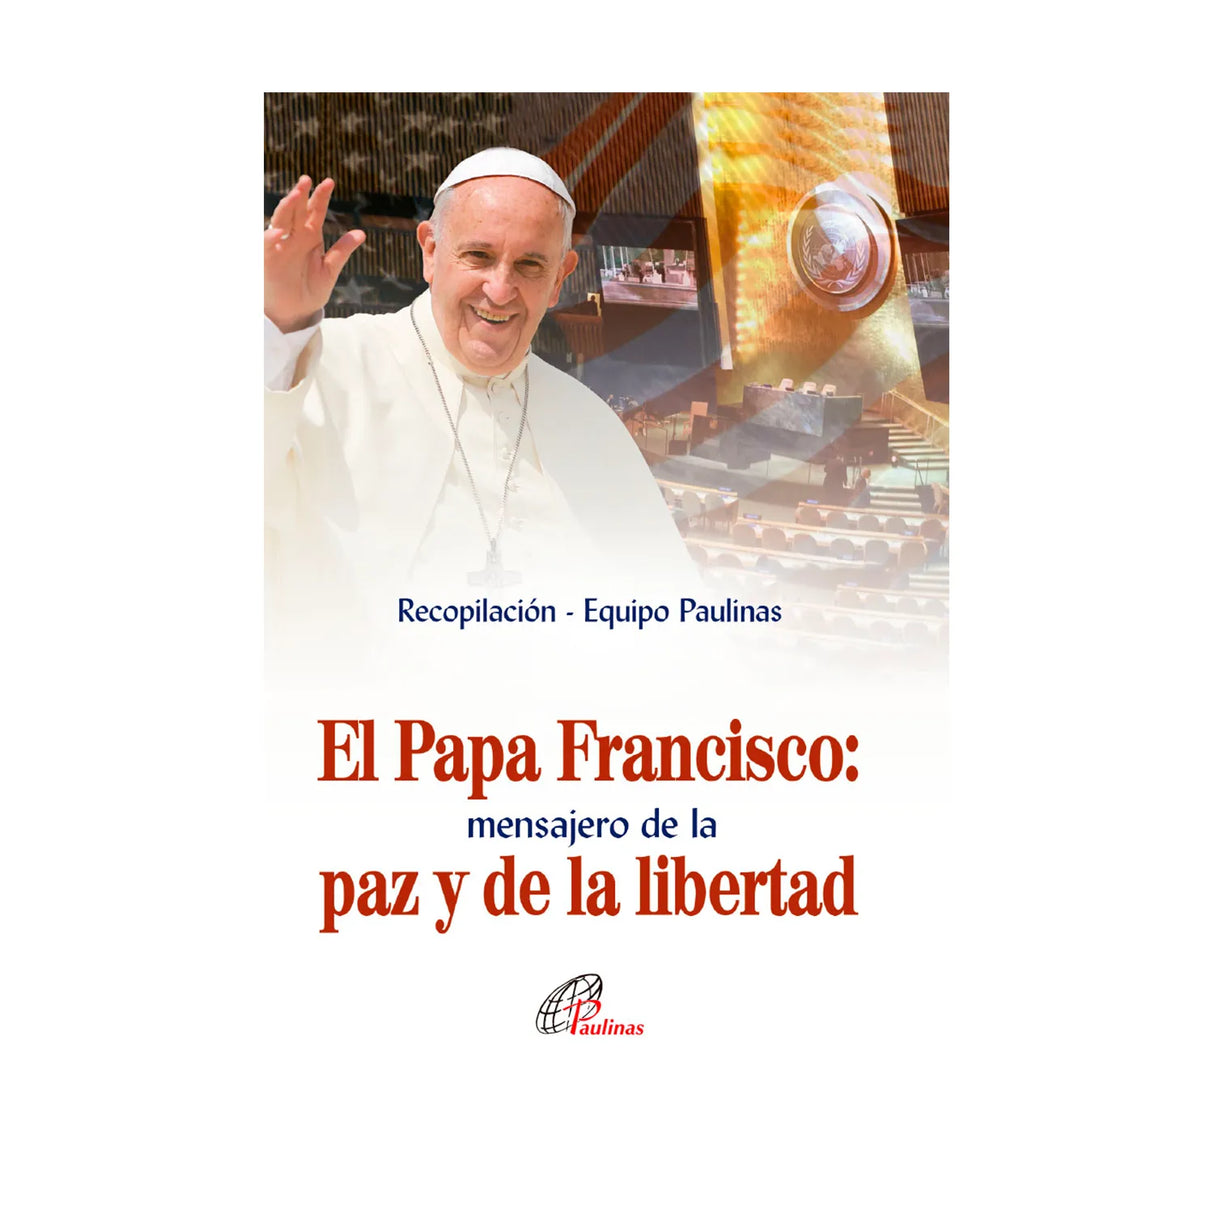 Pope Francis: messenger of peace and freedom 